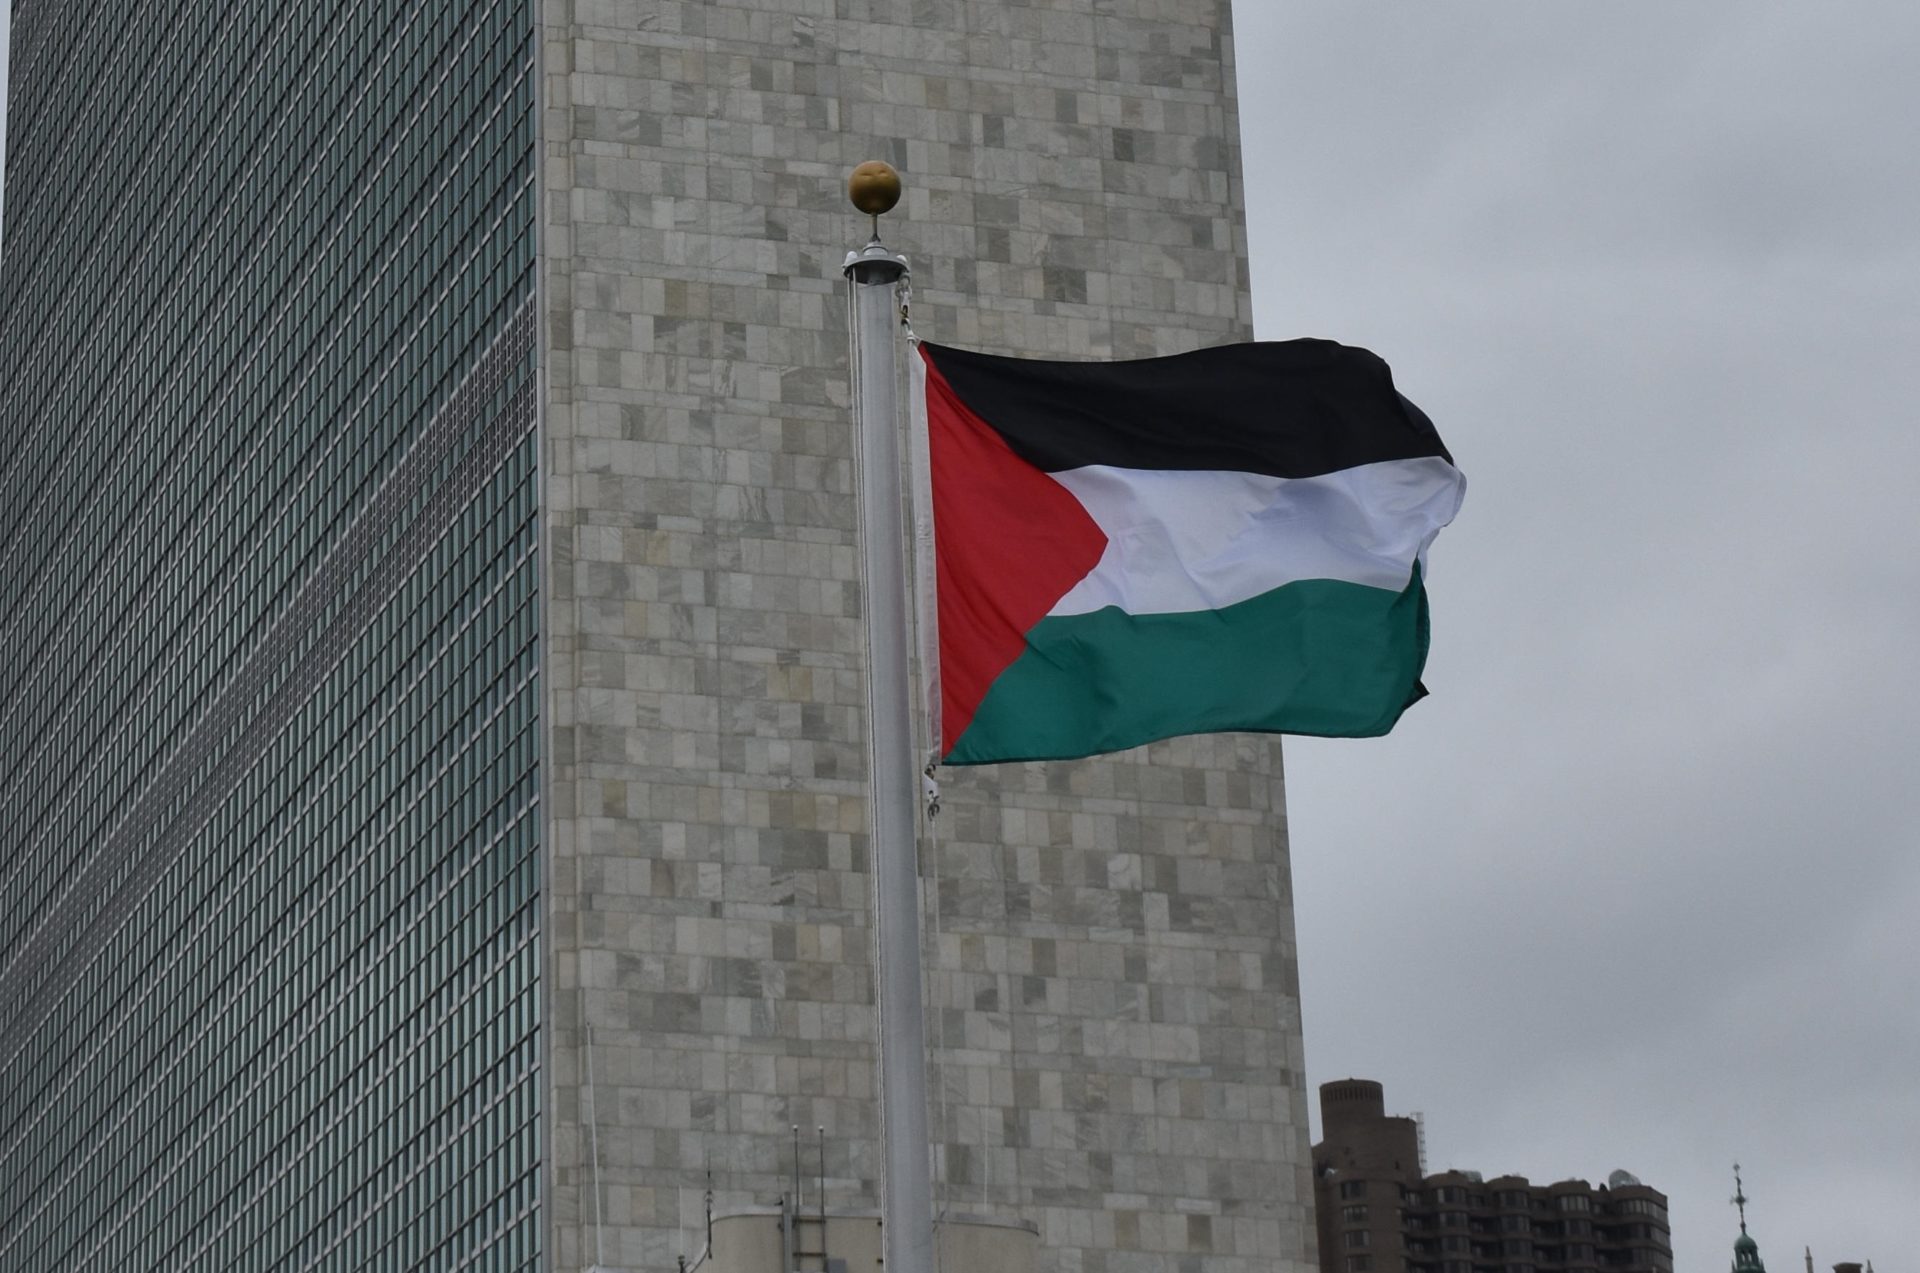 The Palestinian flag flies at the United Nations in New York, 30-9-15.